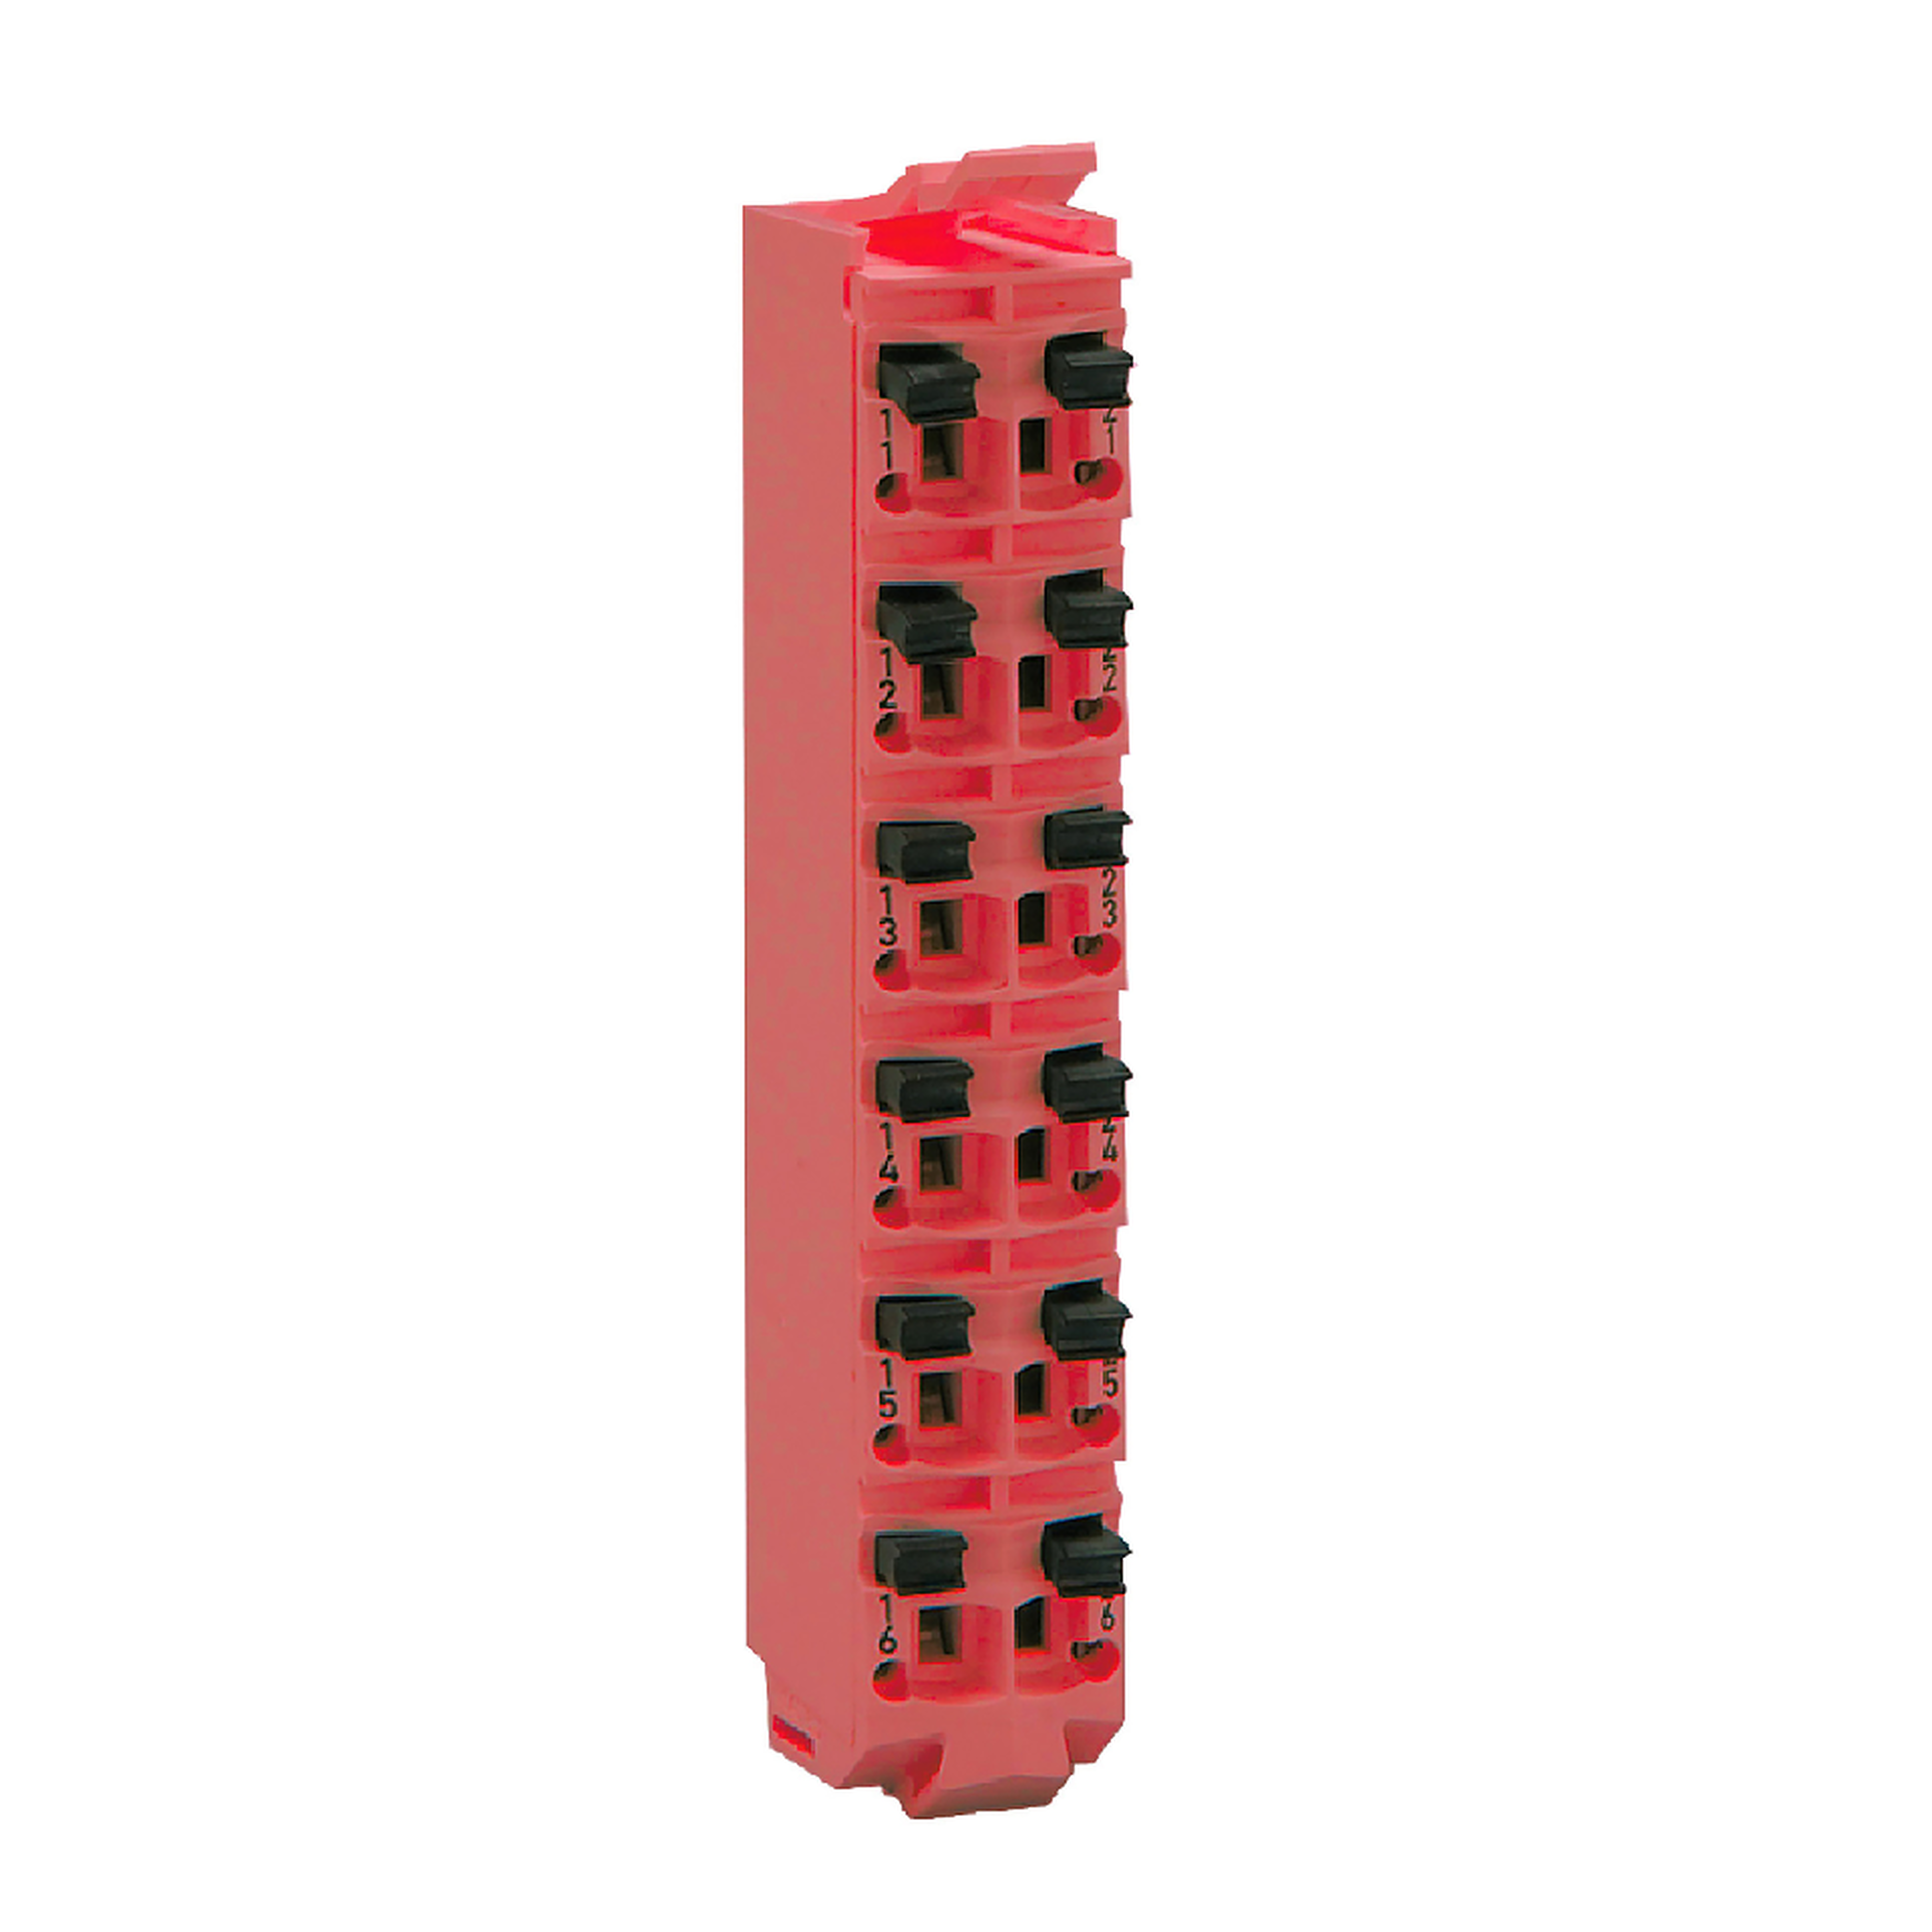 Modicon TM5, terminal block with PT1000 temp. compensation, 16 contacts, red, quantity 1